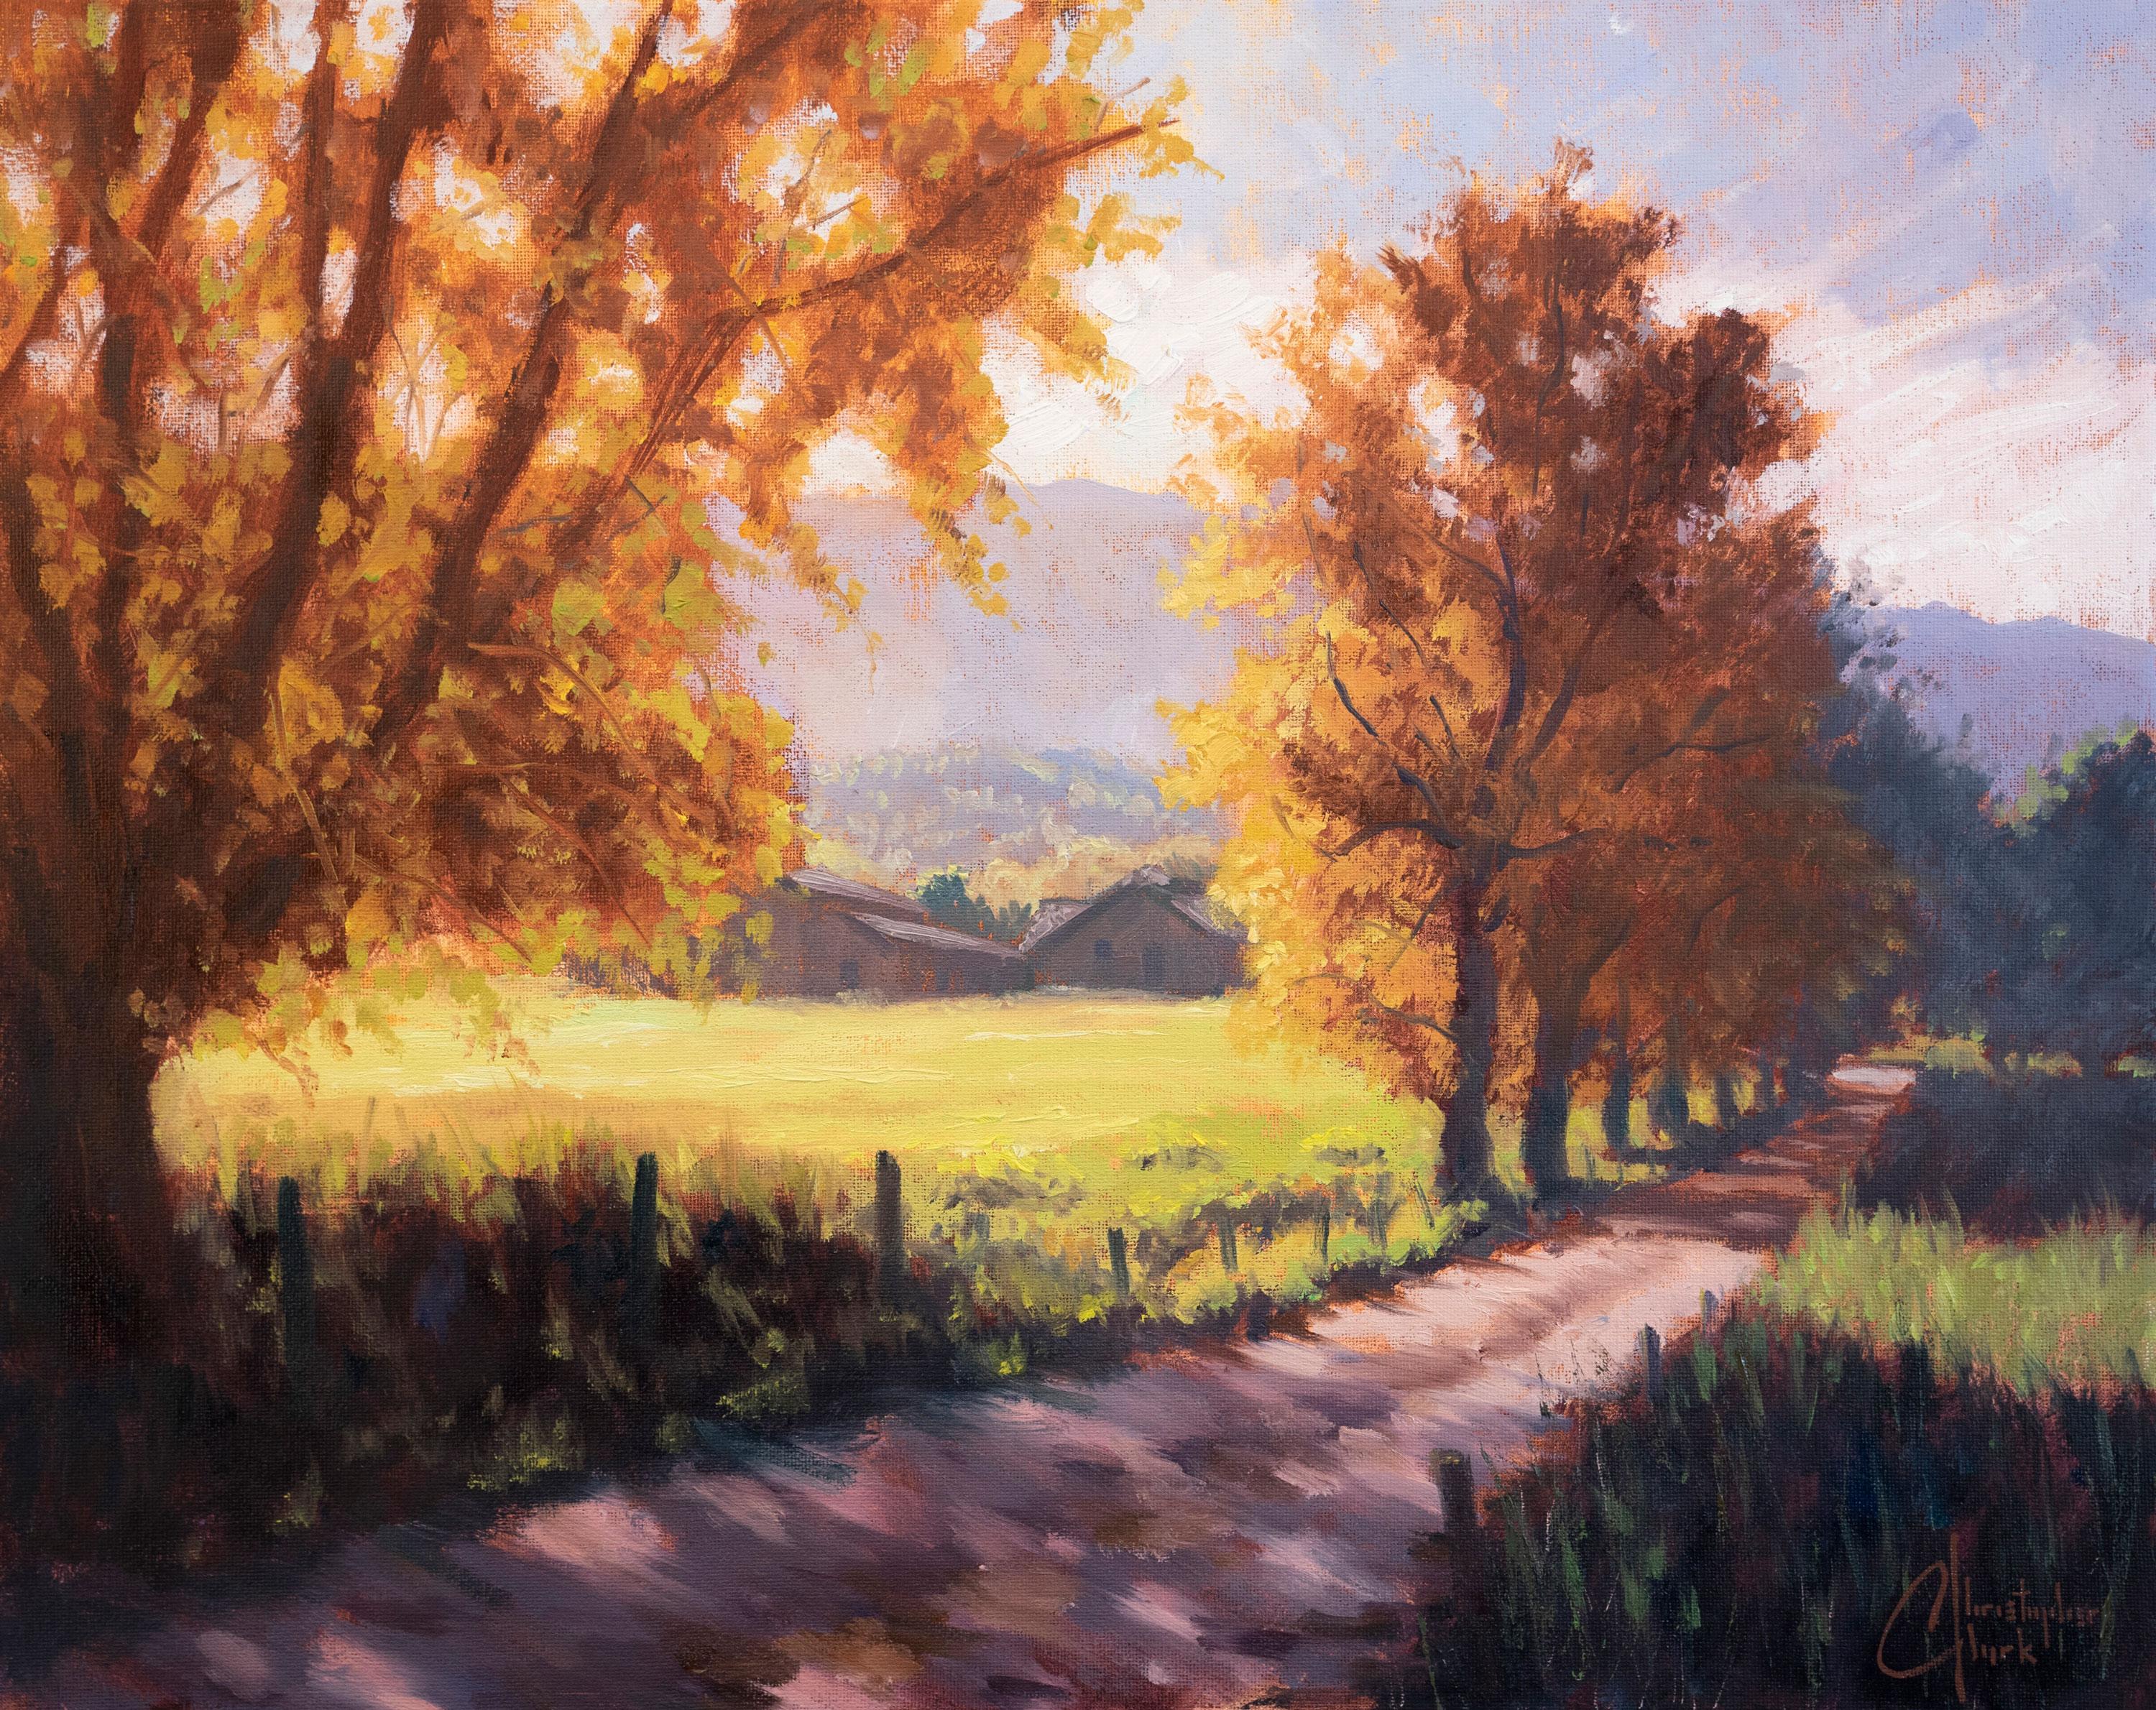 Christopher Clark Figurative Painting - "Countryside Path" Oil Painting